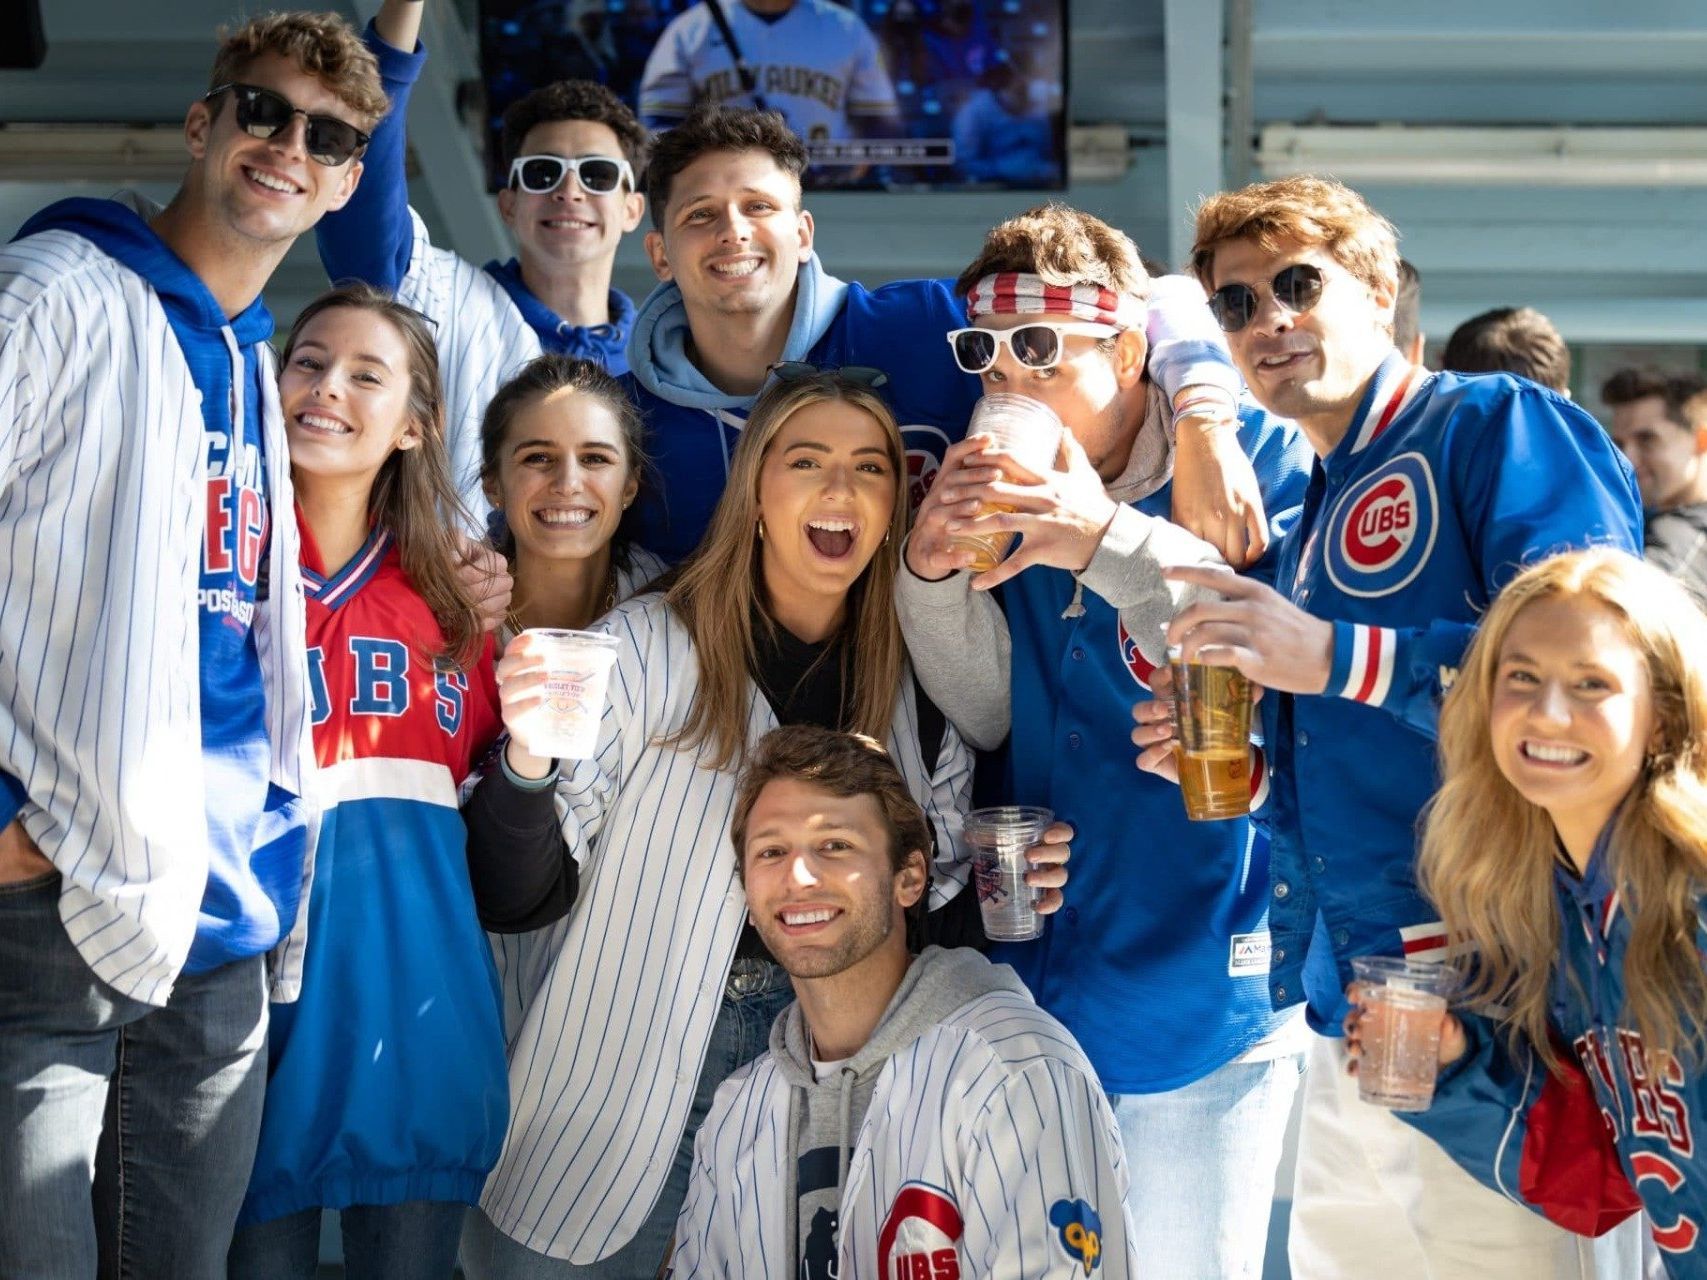  jubilant baseball fans, dressed in Chicago Cubs attire, are celebrating at a game.